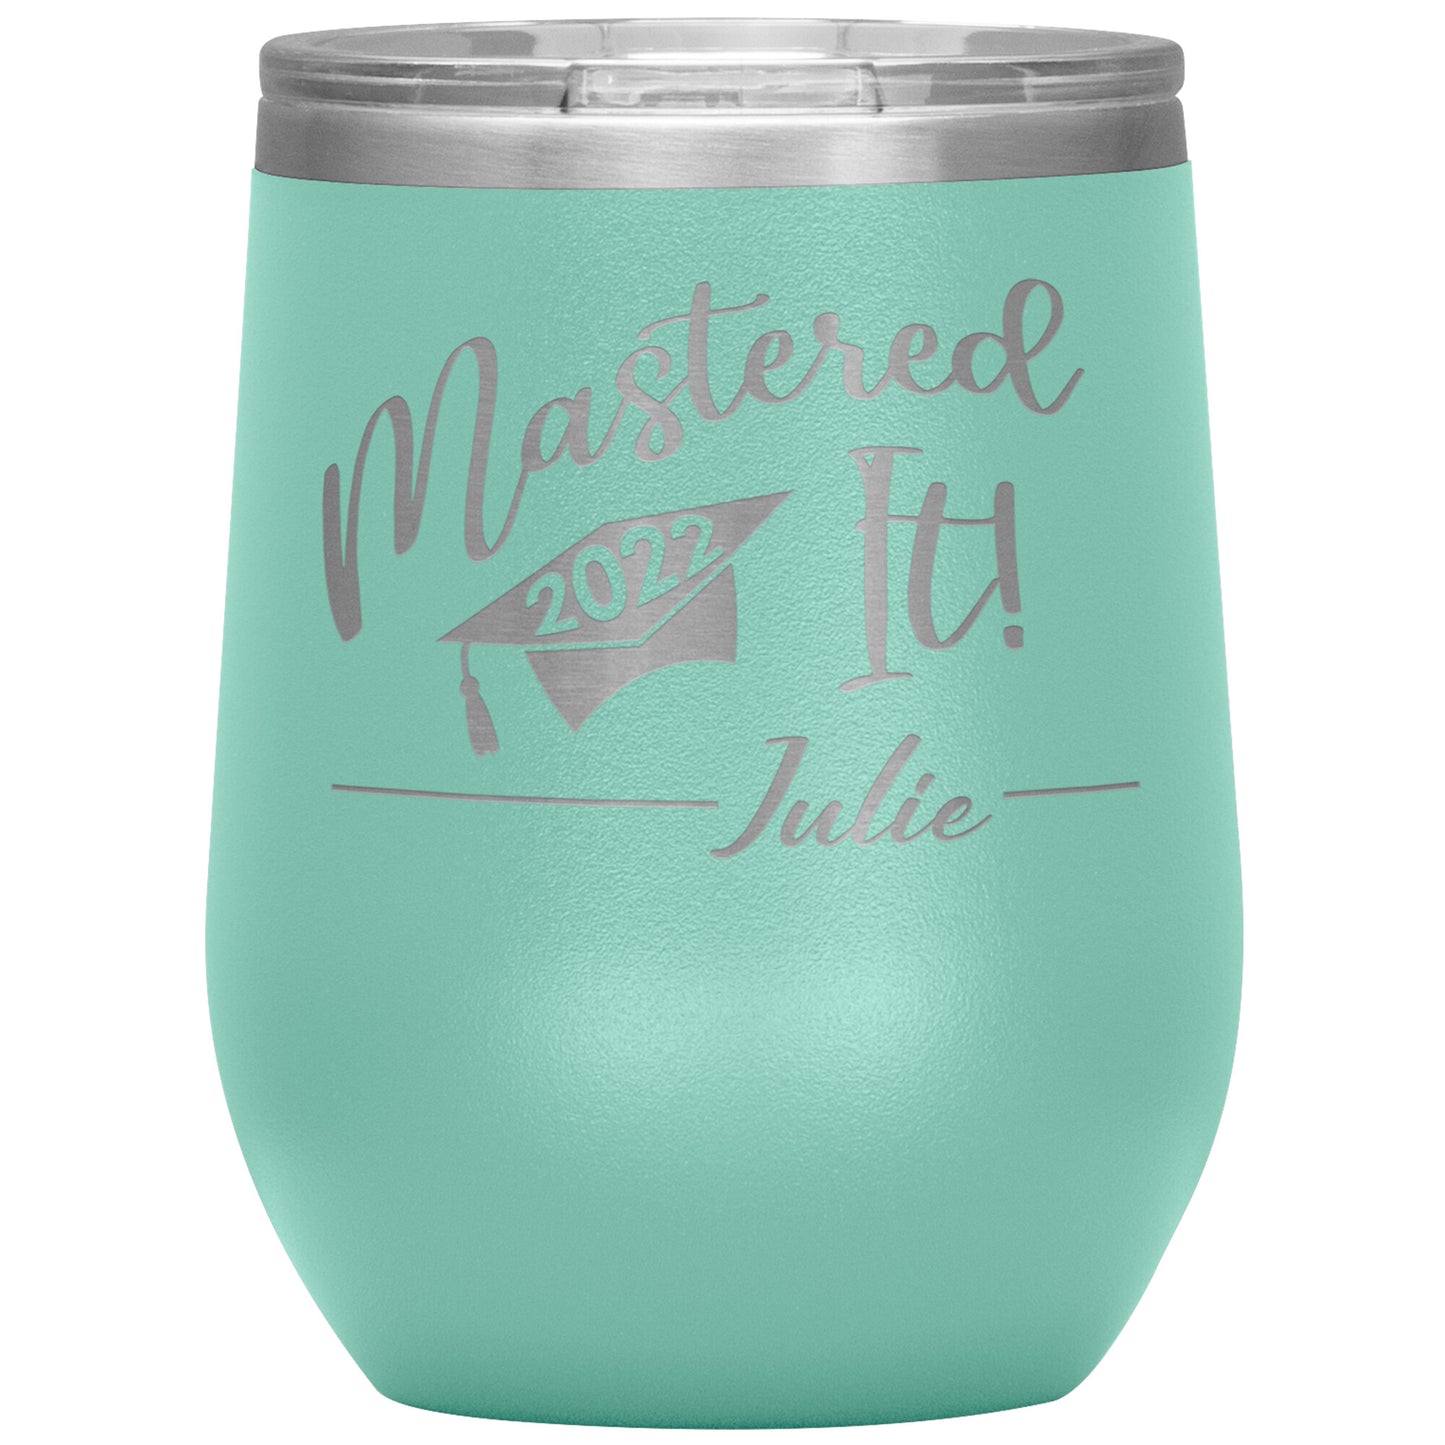 Mastered It 2022 Personalized Tumbler